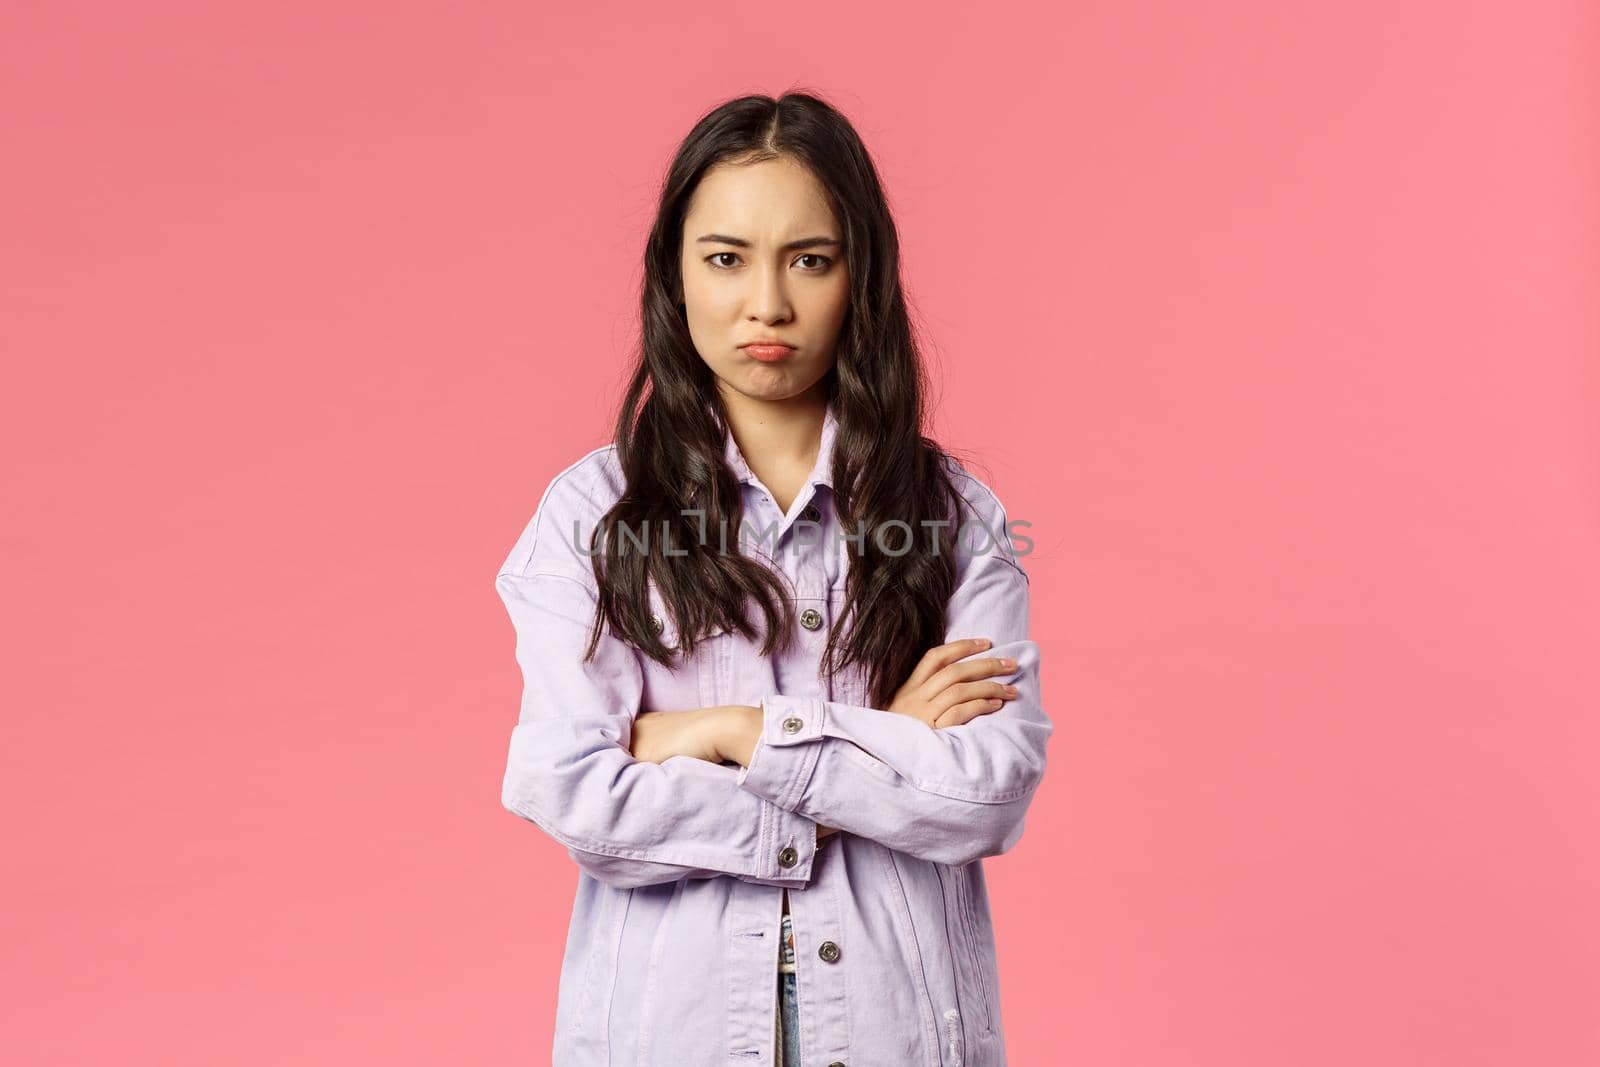 Portrait of gloomy offended young defensive girl, cross hands over chest frowning and sulking, feel betrayed or insulted, unwilling to speak with friend, standing pink background reluctant.